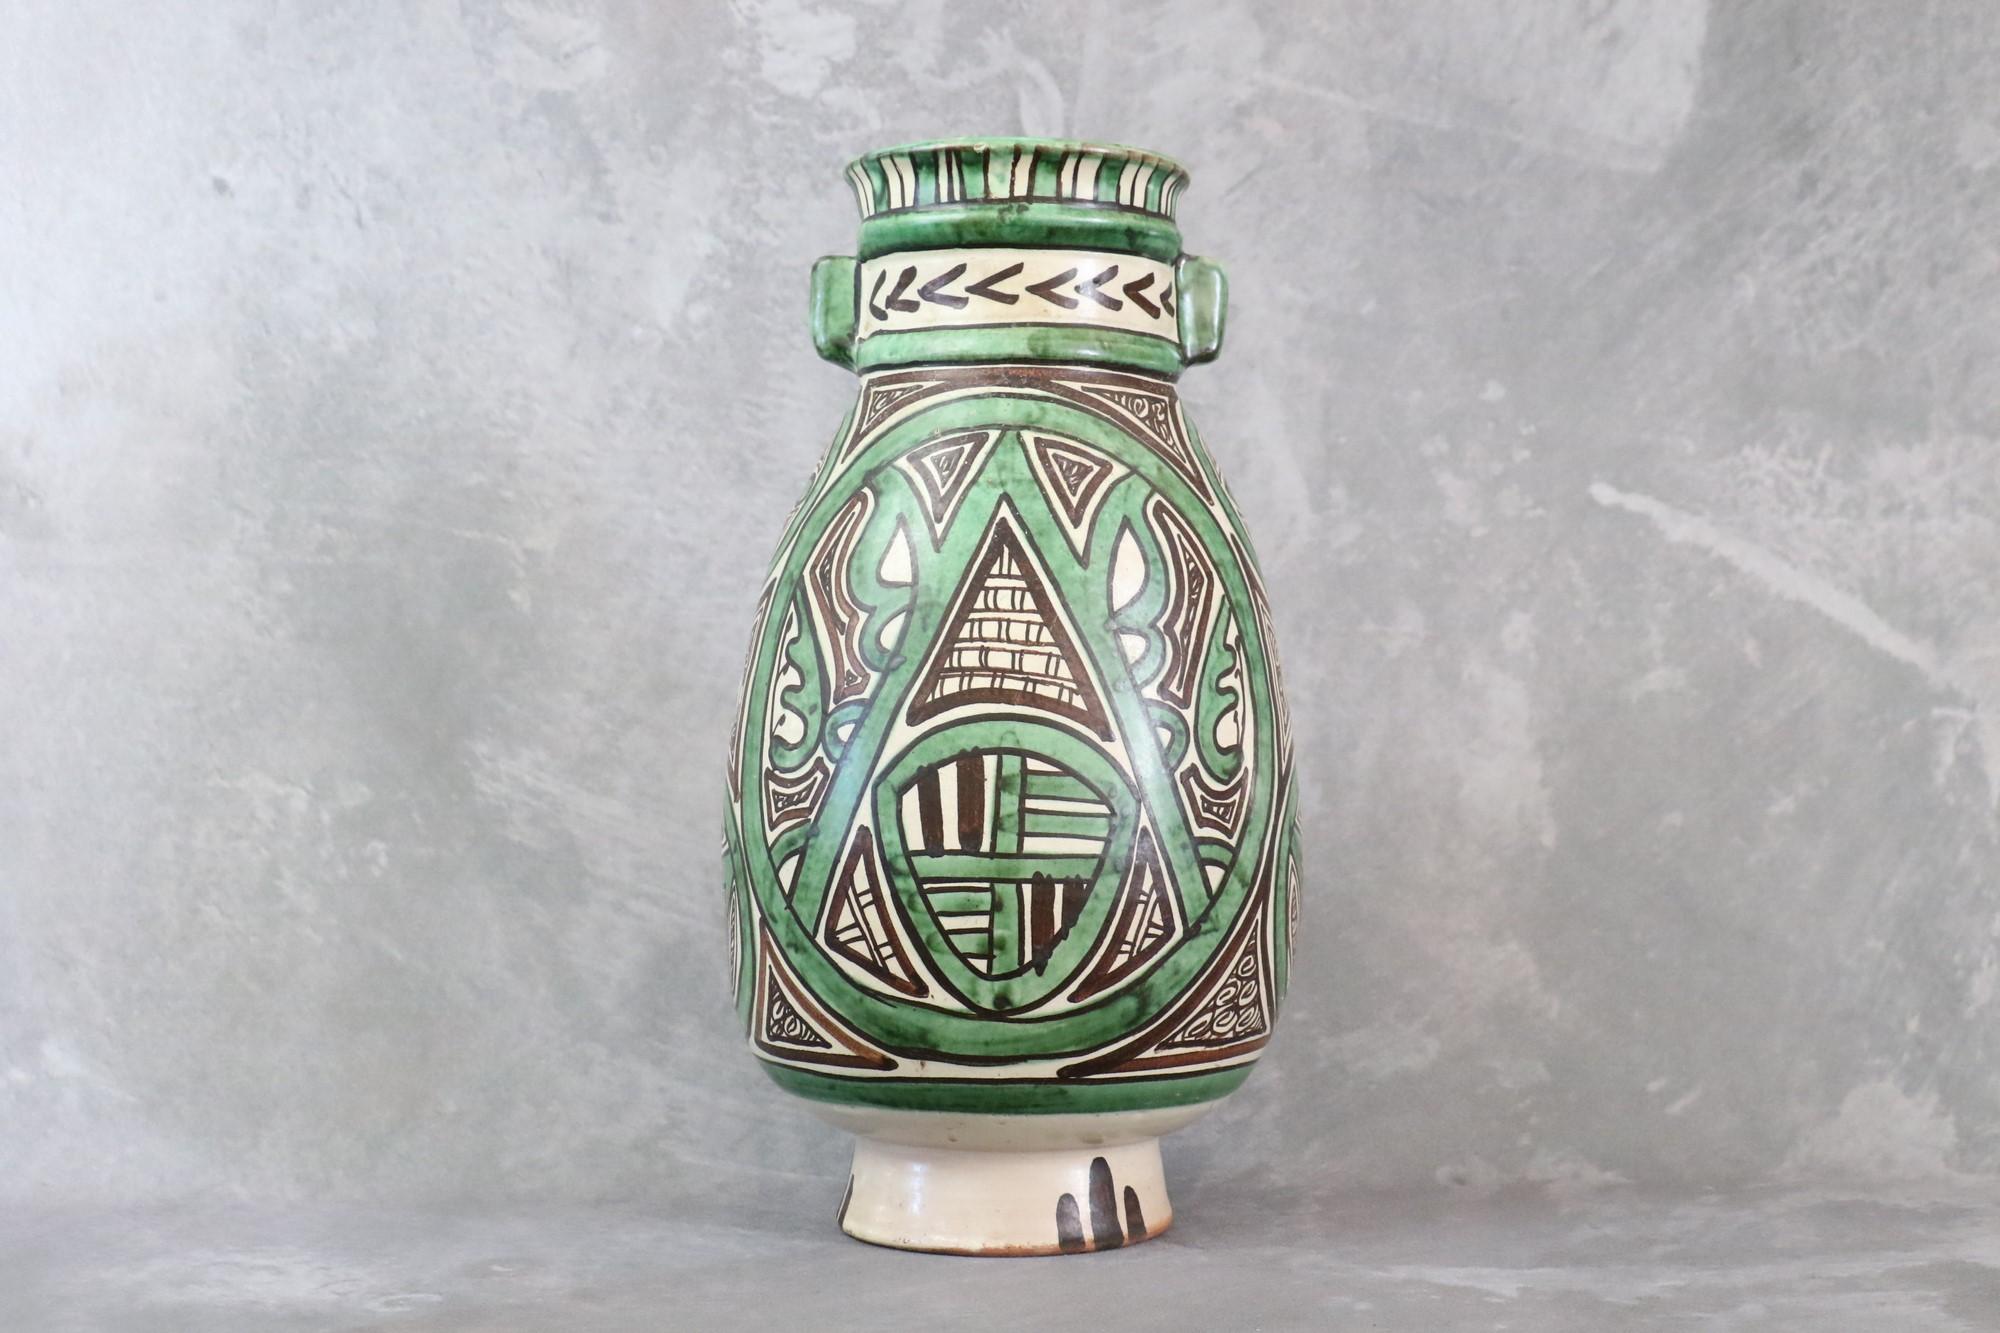 Spanish mid-century ceramic vase - signed Punter - hand painted Domingo Punter.

A ceramist of the 1950s, domingo punter comes from a family of potters-ceramists based in spain since 1910. The company manufactures 